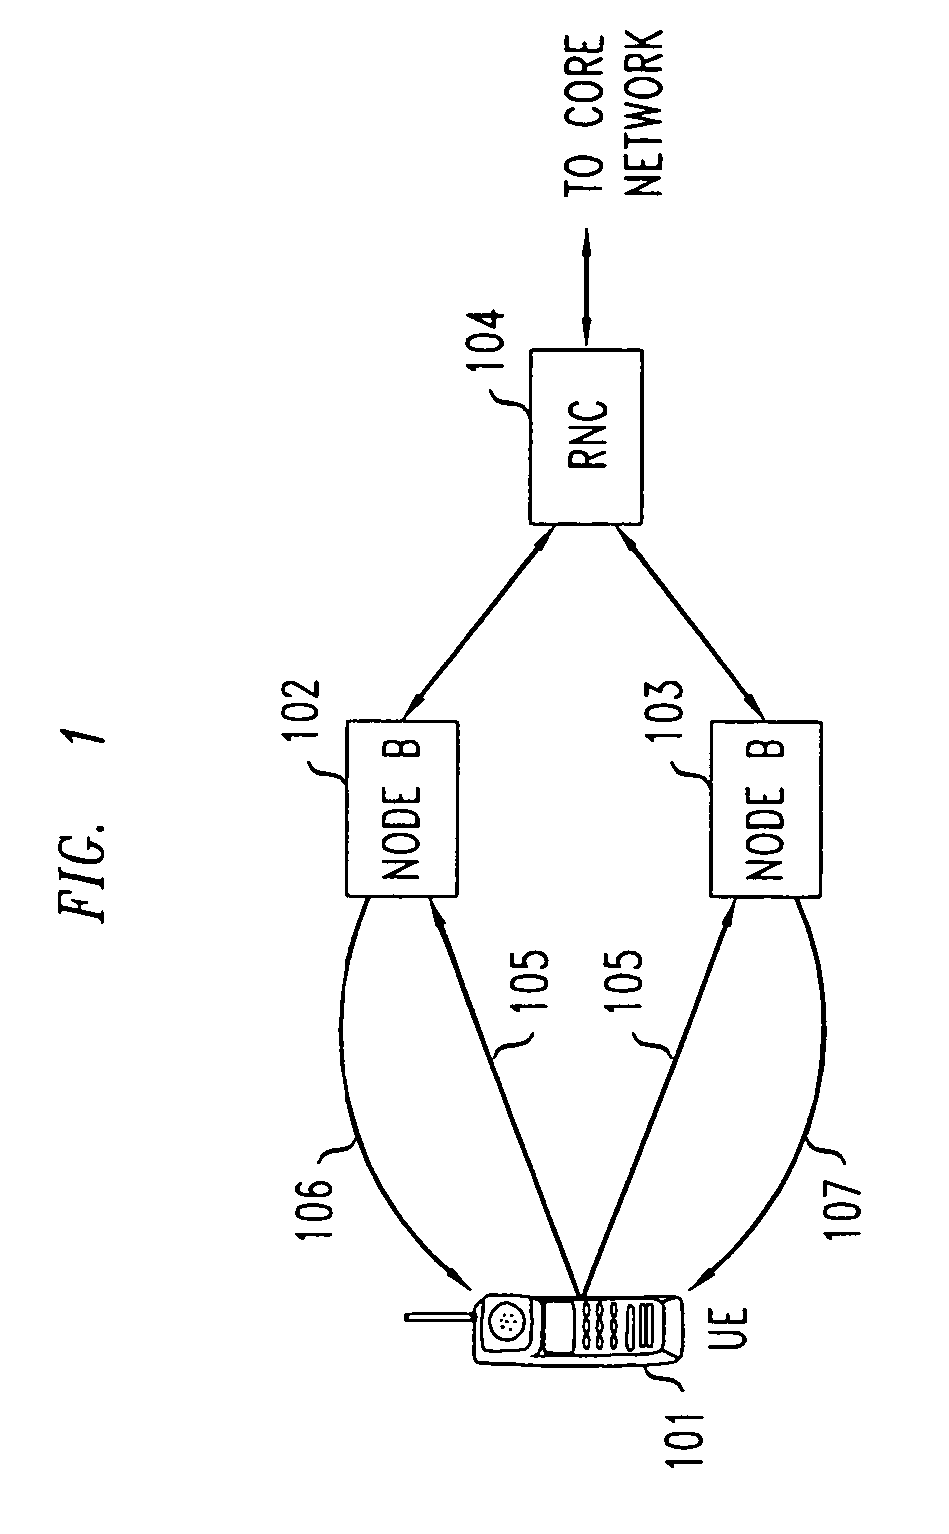 Method of increasing the capacity of enhanced data channel on uplink in a wireless communications system